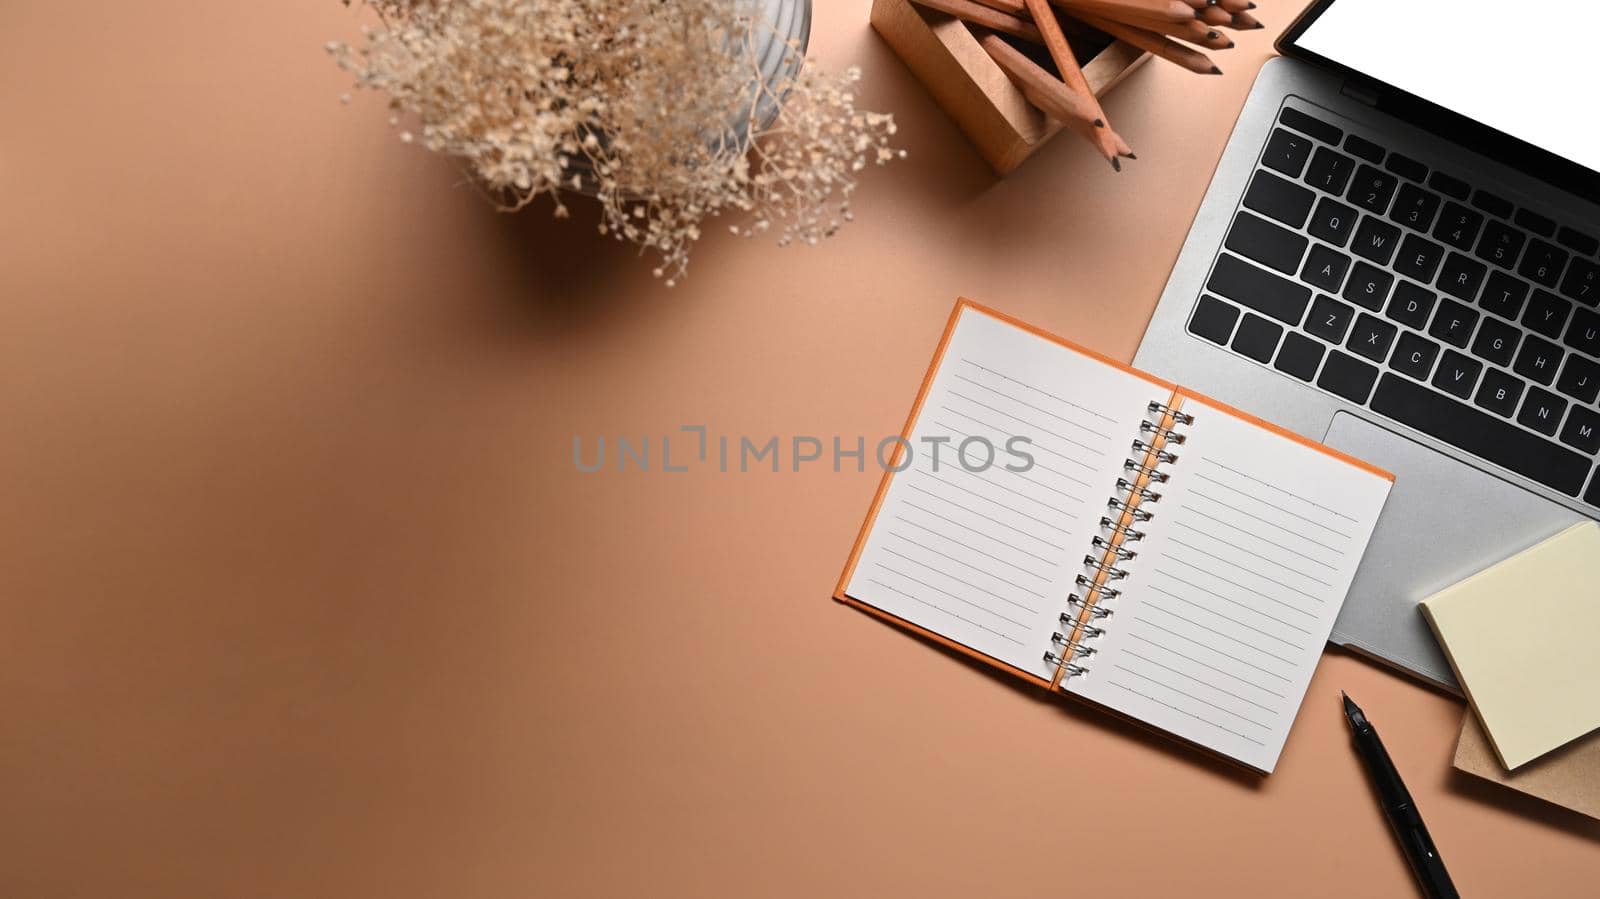 Stylish workspace with laptop, notebook, stick notes and pencil holder on beige background. by prathanchorruangsak